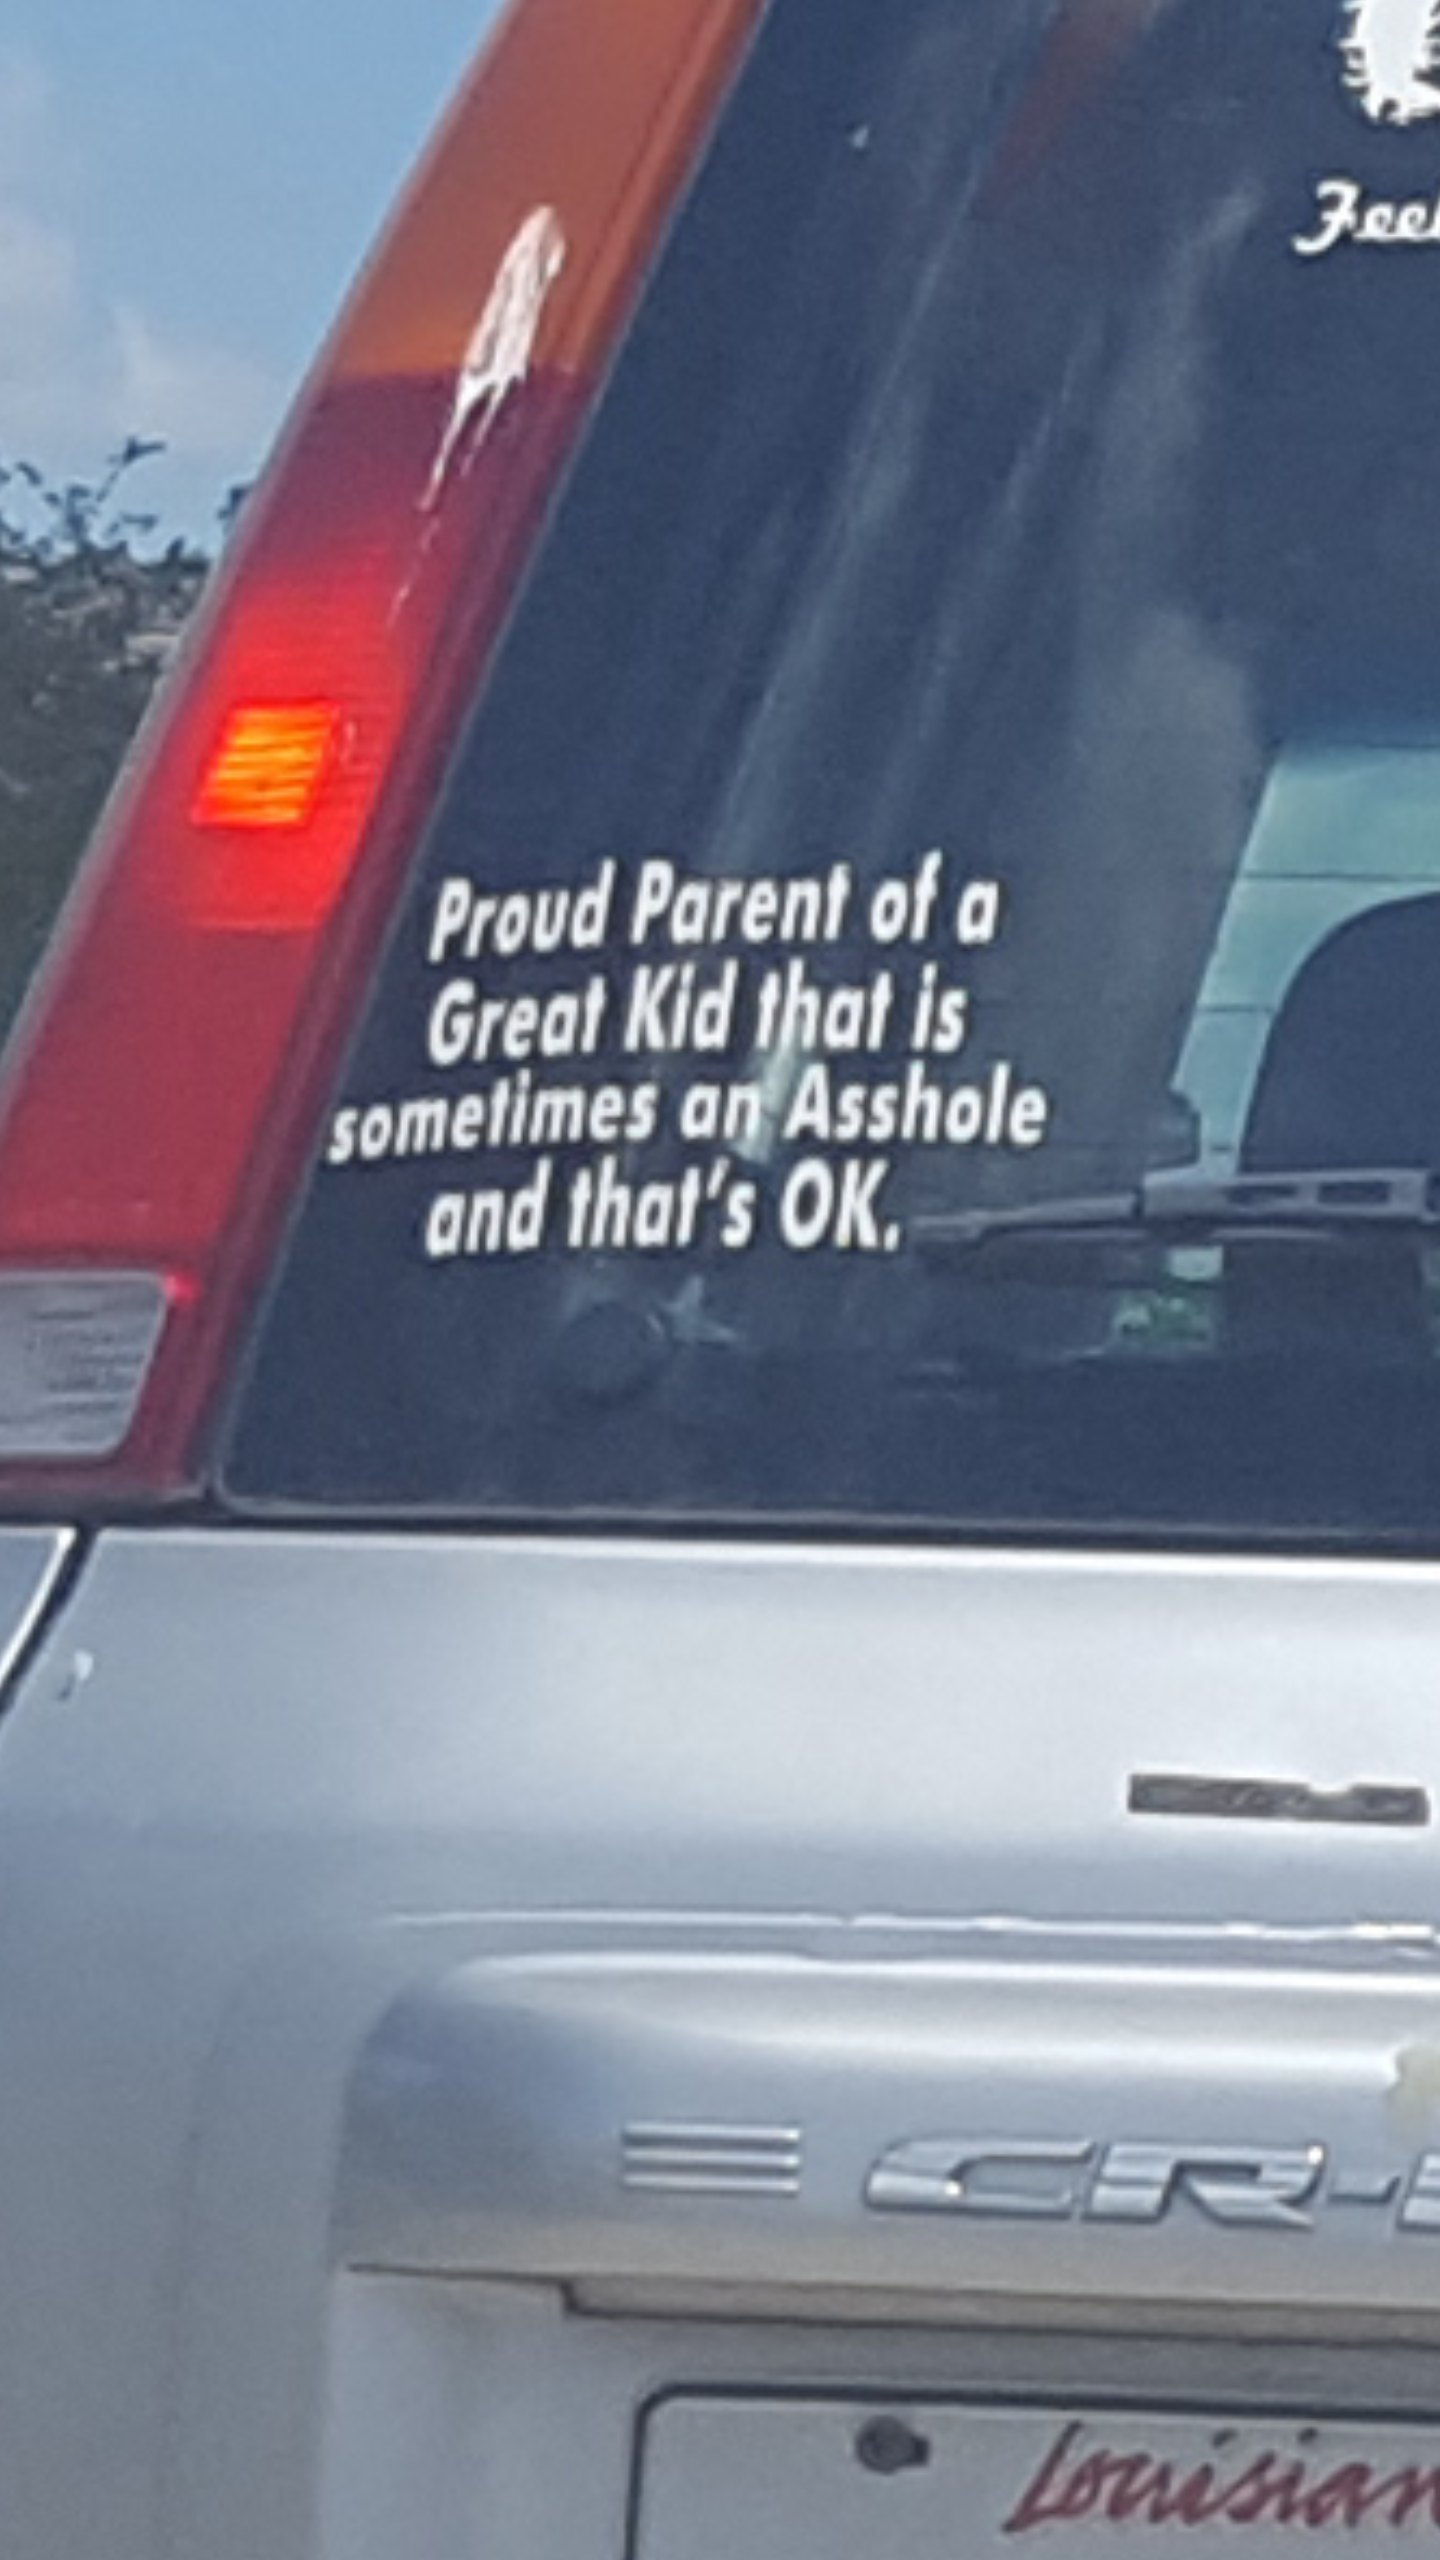 Saw this gem while waiting at a light